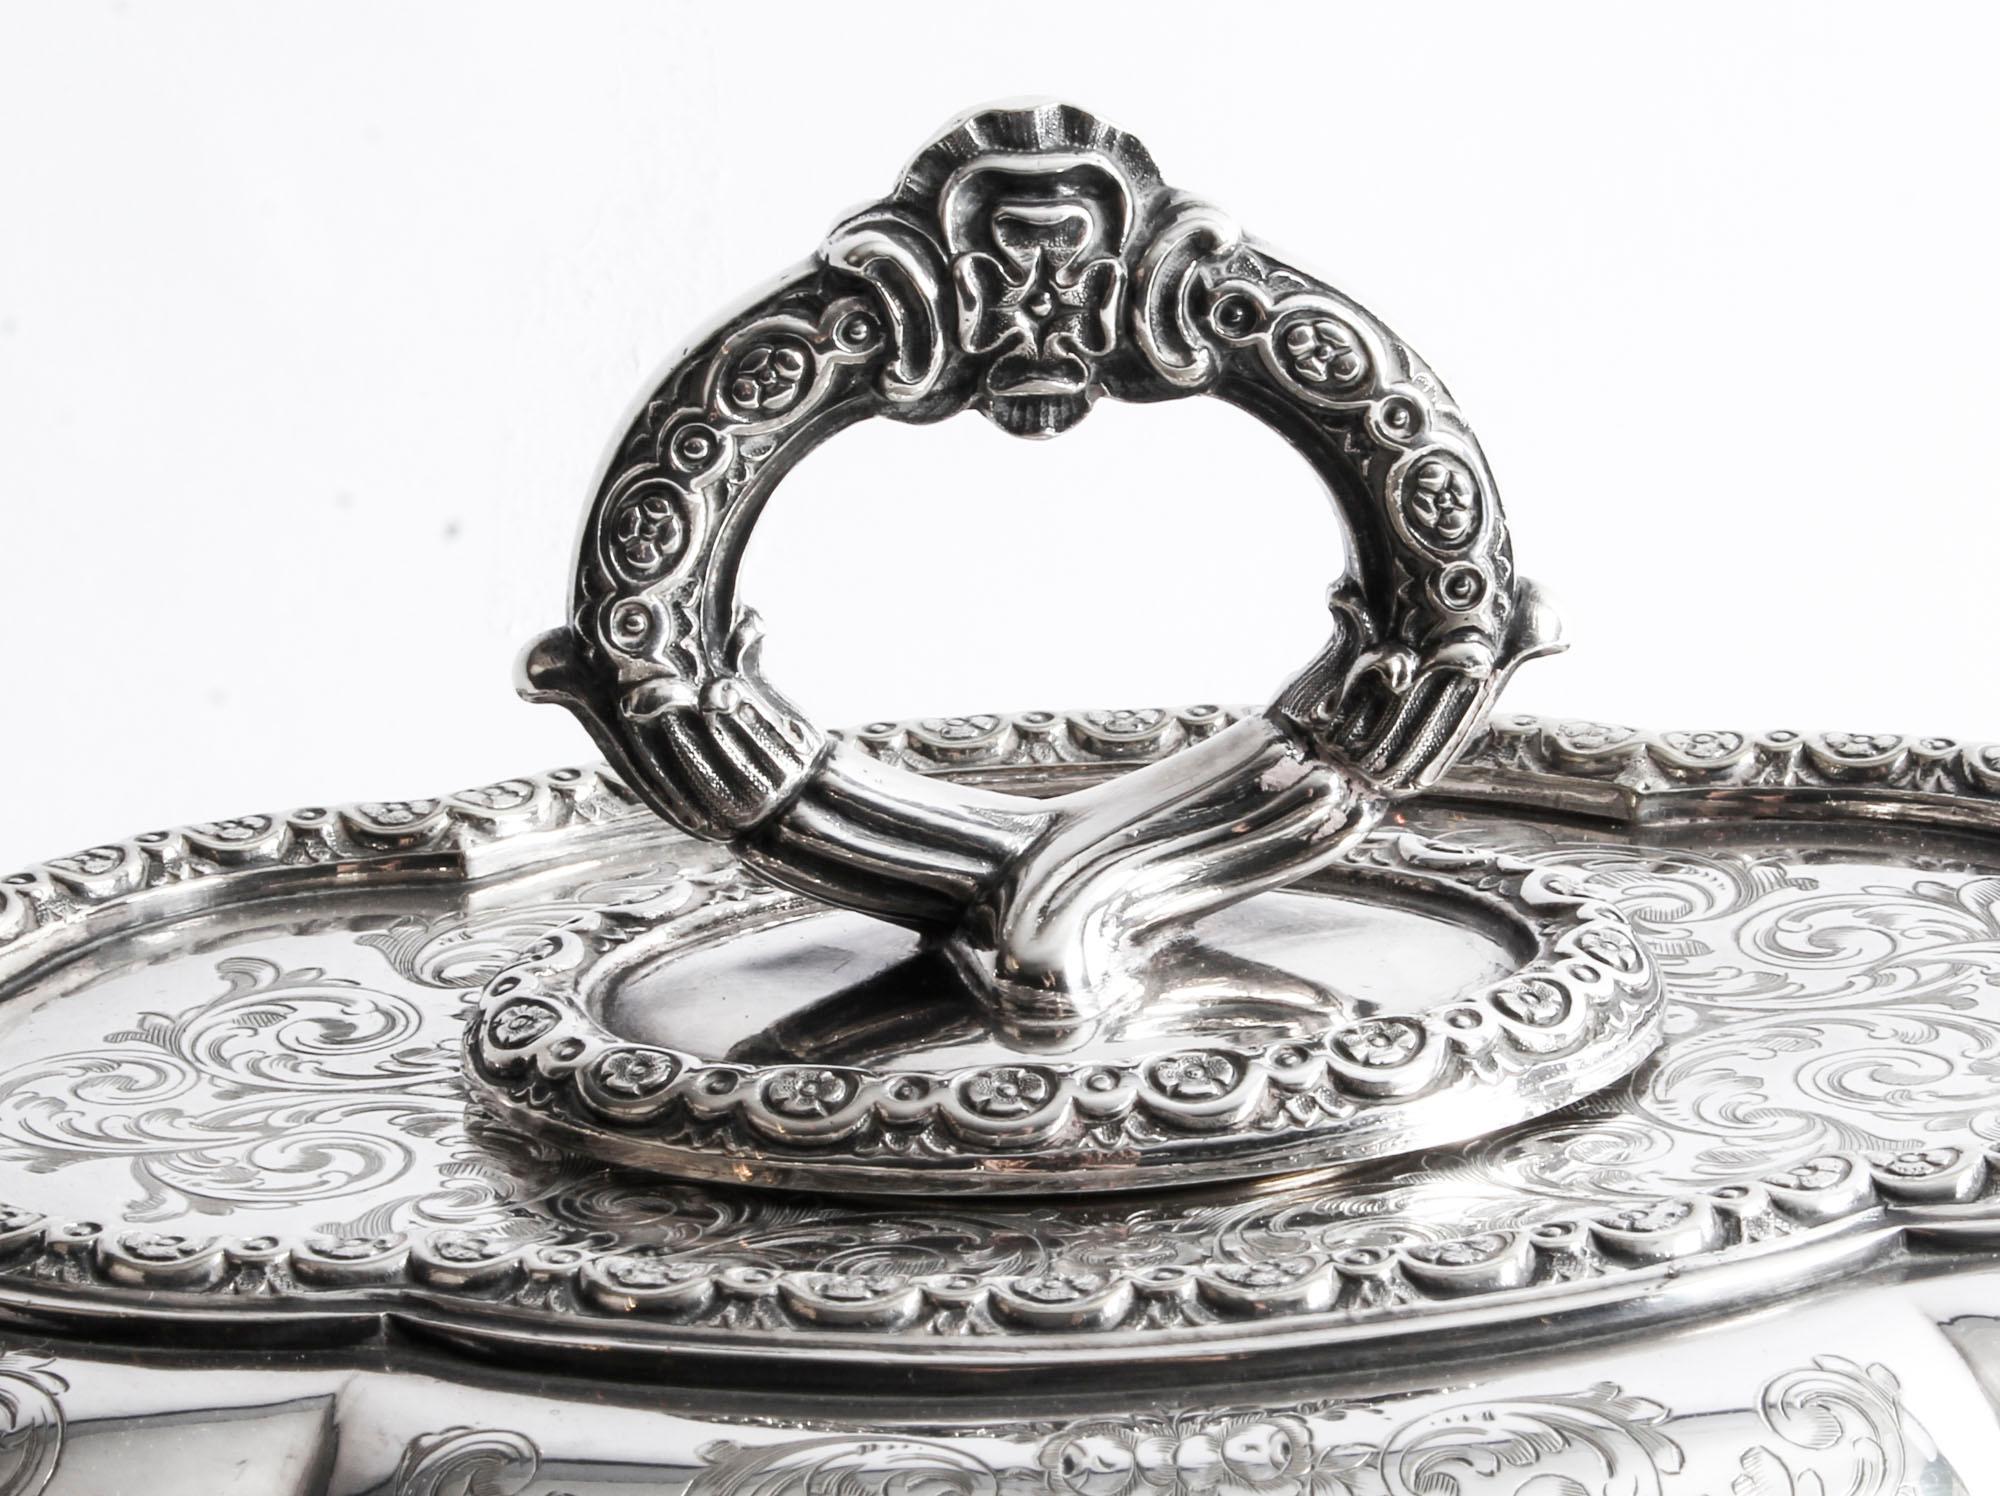 This is an exquisite antique English Victorian silver plated vegetable entree dish made by the renown silversmiths, Collis and Co, London, circa 1870 in date.
 
This splendid entree dish is oval with delightfully shaped borders and features